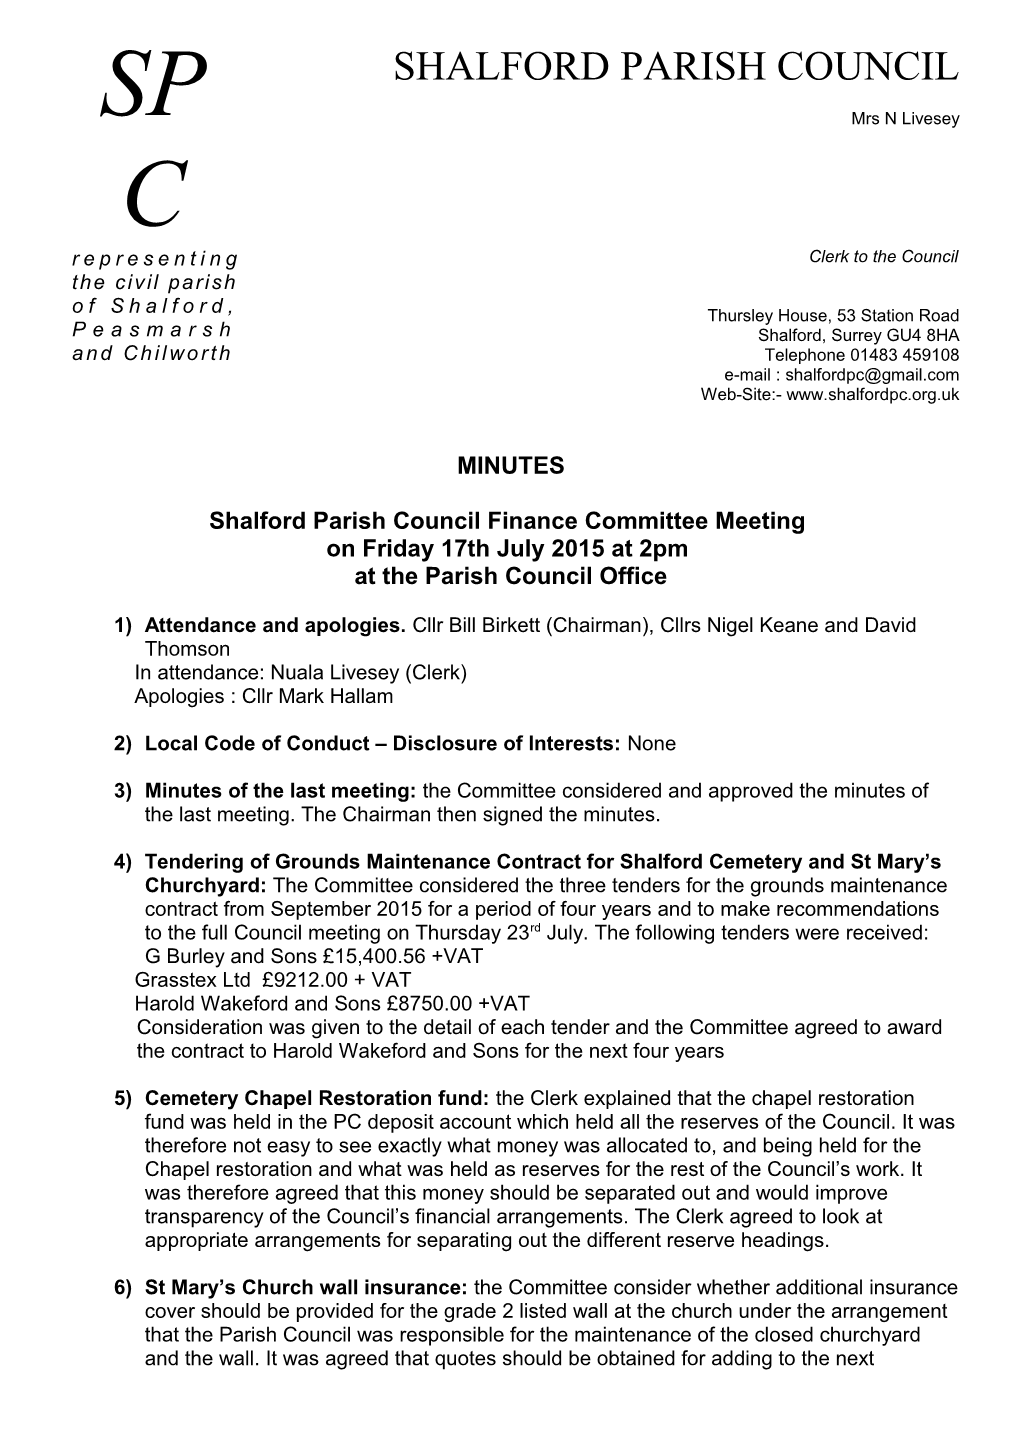 Shalford Parish Council Finance Committee Meeting